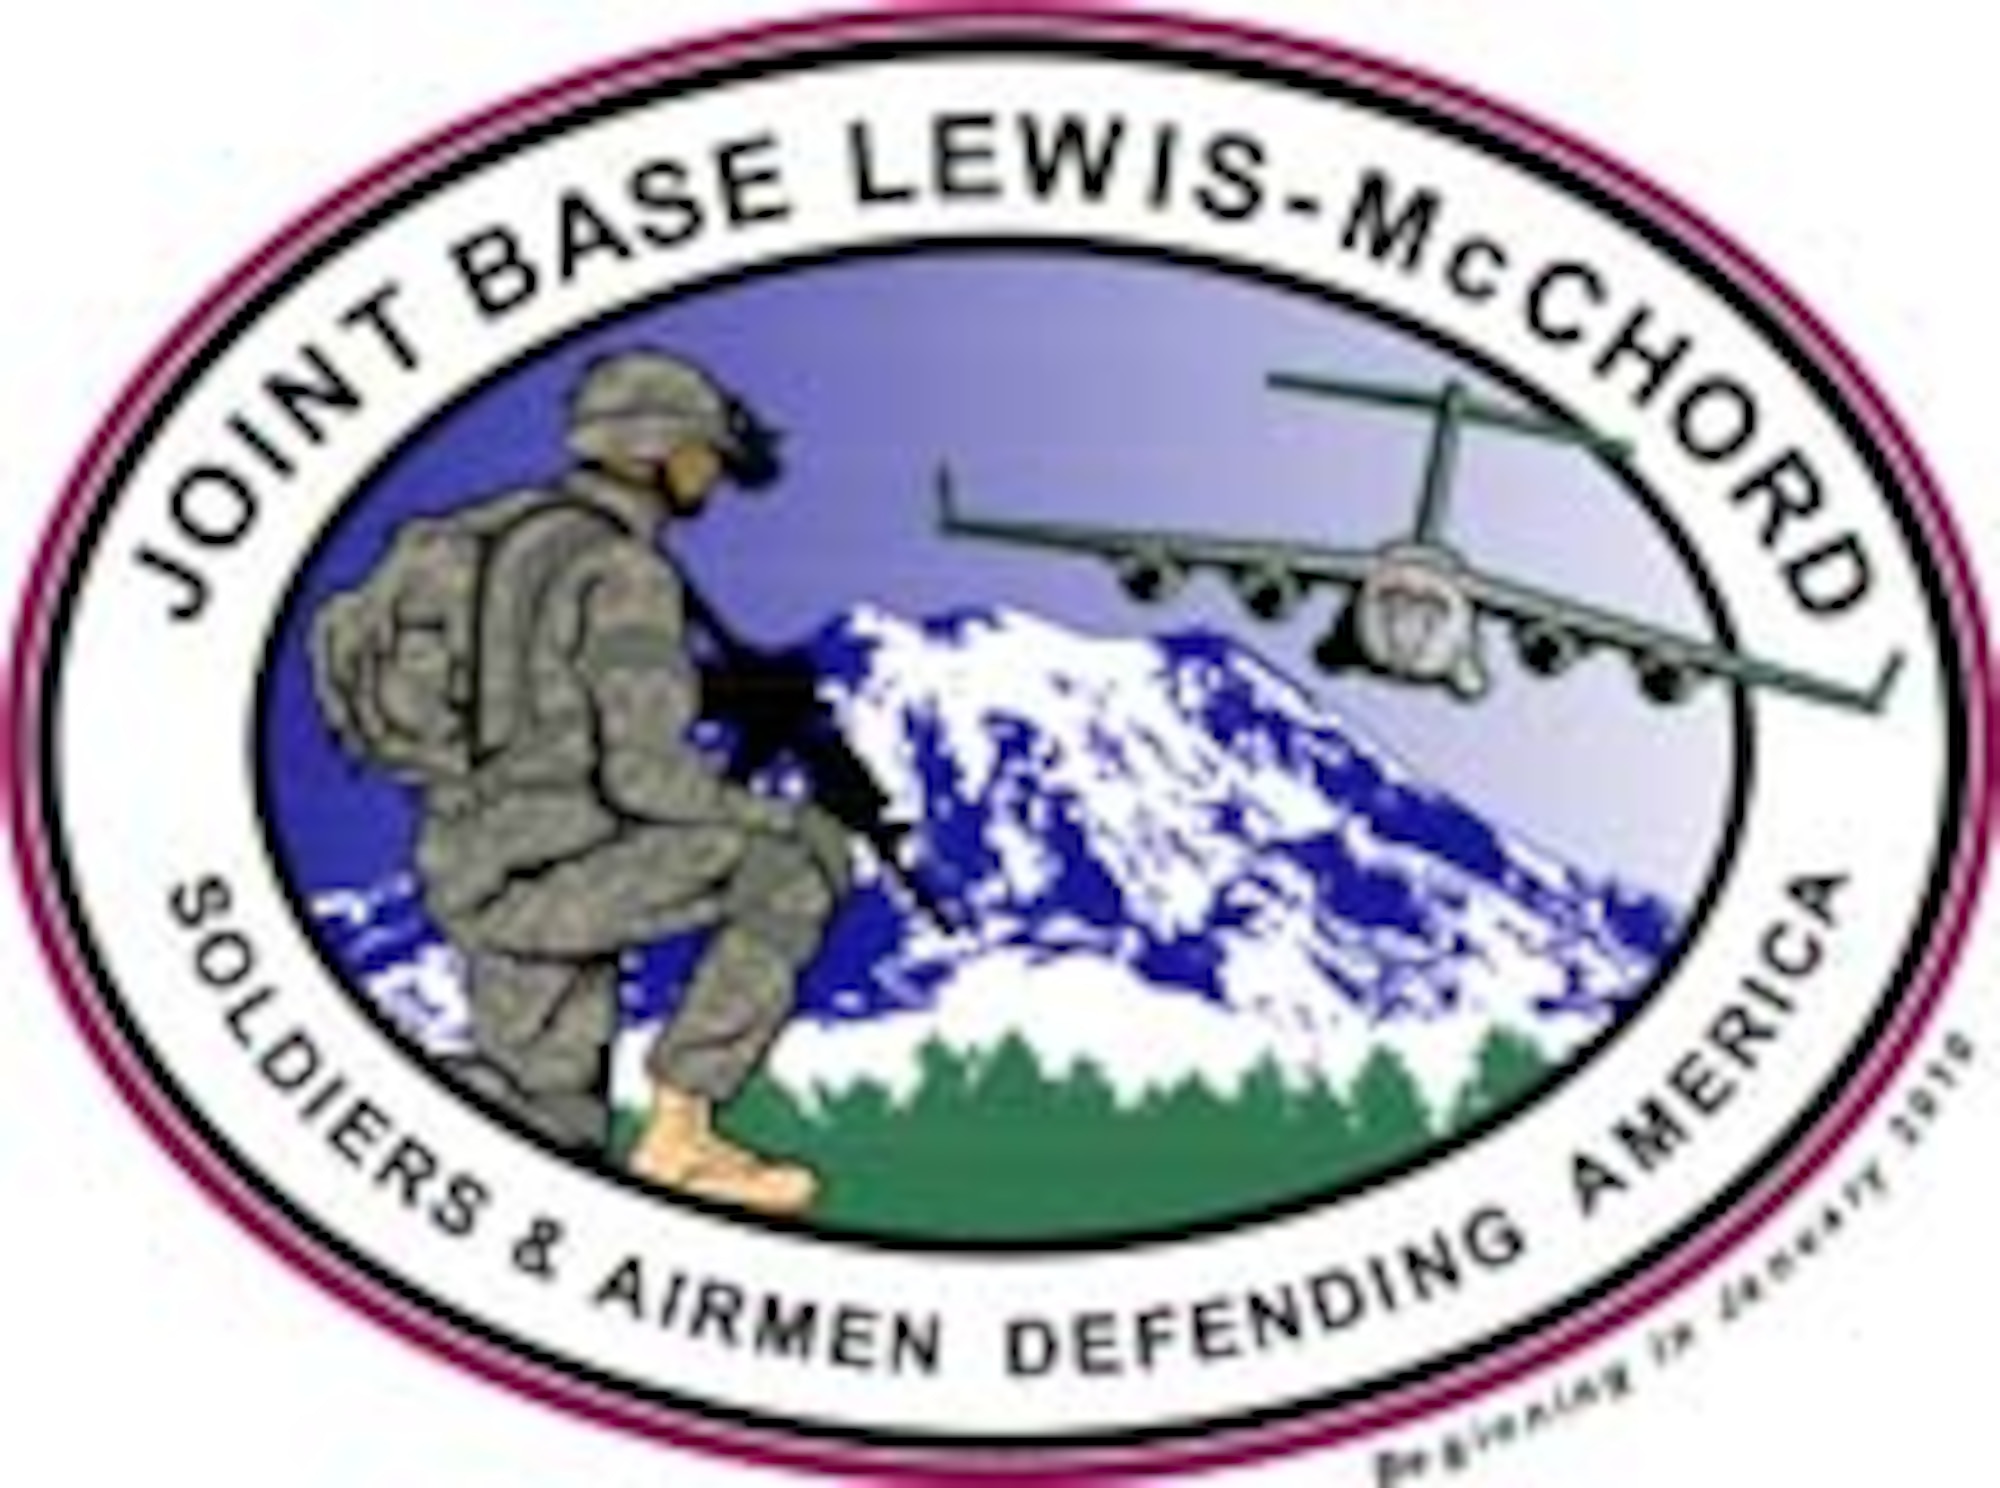 McChord Air Force Base and Fort Lewis, Wash., will become Joint Base Lewis-McChord as directed by the 2005 Department of Defenase Base Realignment and Closure Commission. Initial operational capability for Joint Base Lewis-McChord is set for January 2010, with full operational capability in September 2010.